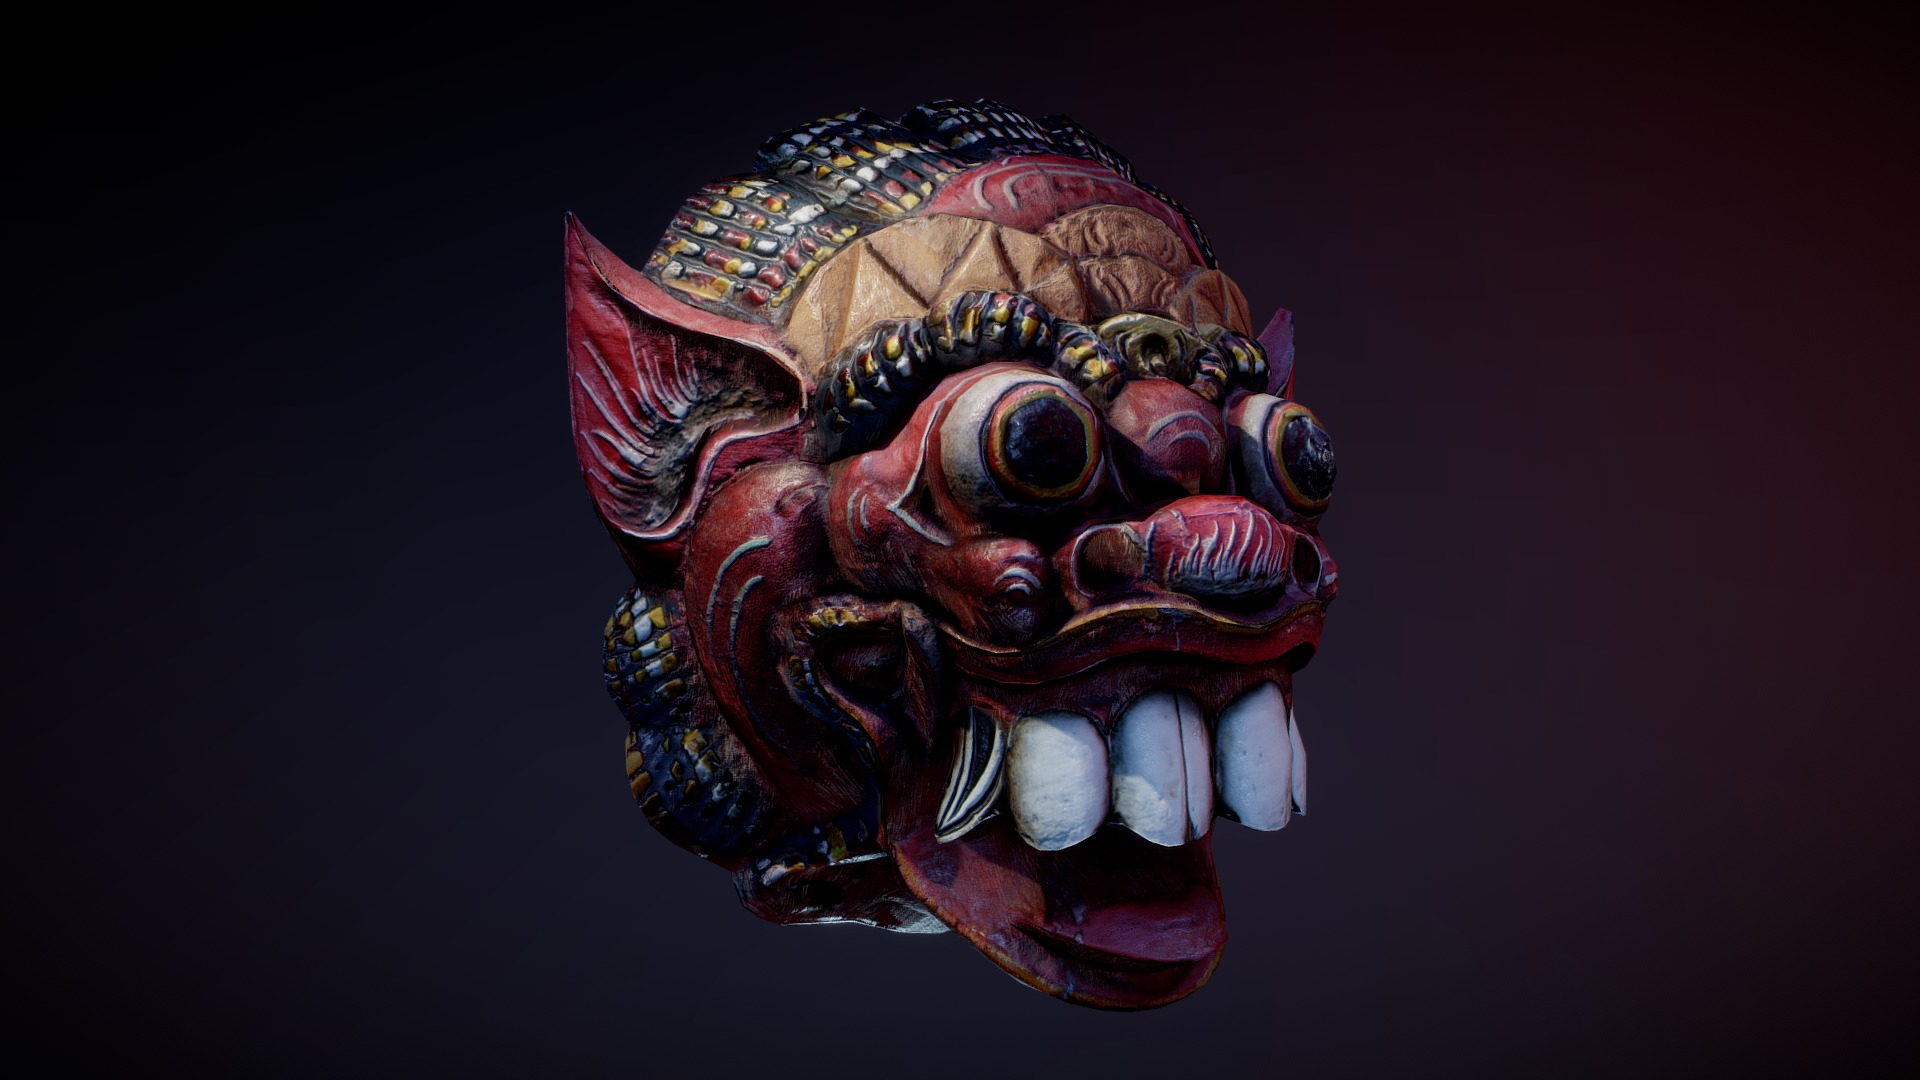 Lowpoly model of indonesian mask founded on scan from MGD Films:https://skfb.ly/6Lnzv

Game textures size — 512x512;

Original hi-rez 2k textures are also included. You’re looking at 2k textures now;

Texel size — 32 ppi (1260 pixels per meter);

PBR texturing;

Tris cound — 2448;

Unreal Engine files included; 

No LODs; - Indonesian Mask - 3D model by NineAssets 3d model